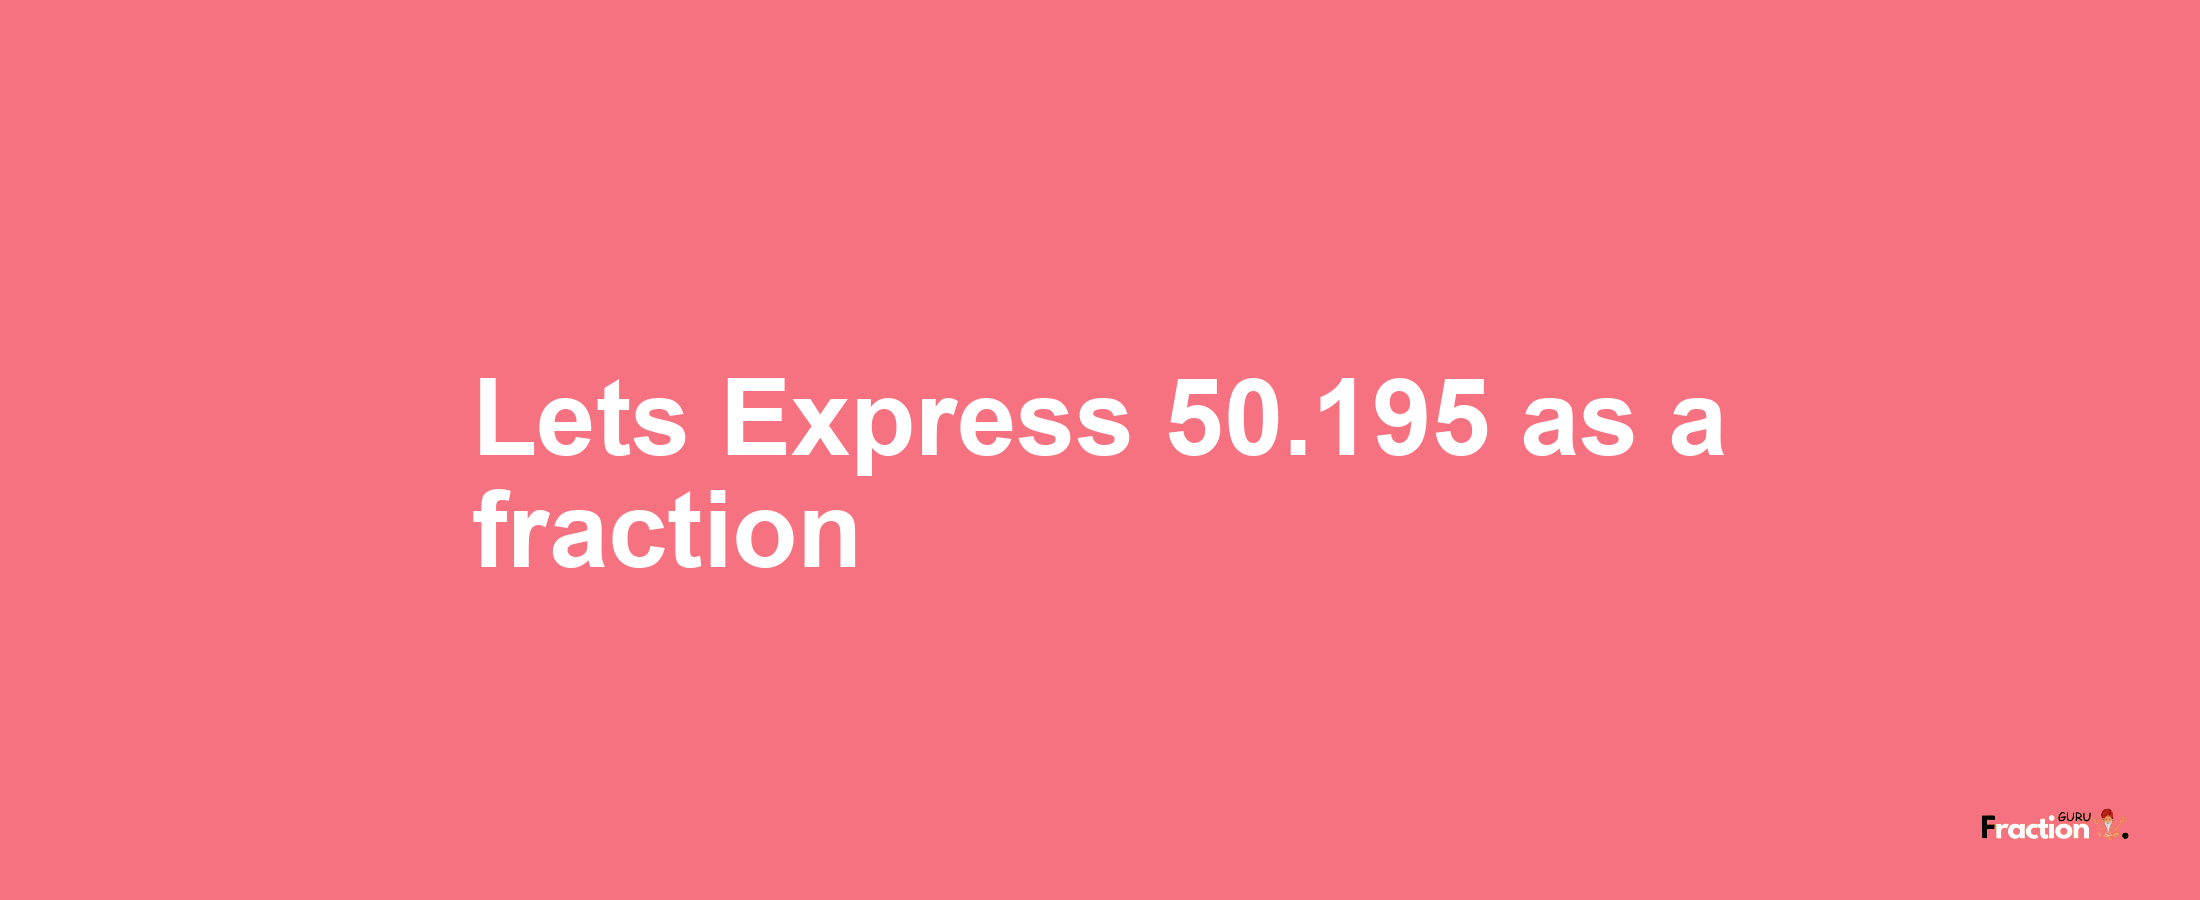 Lets Express 50.195 as afraction